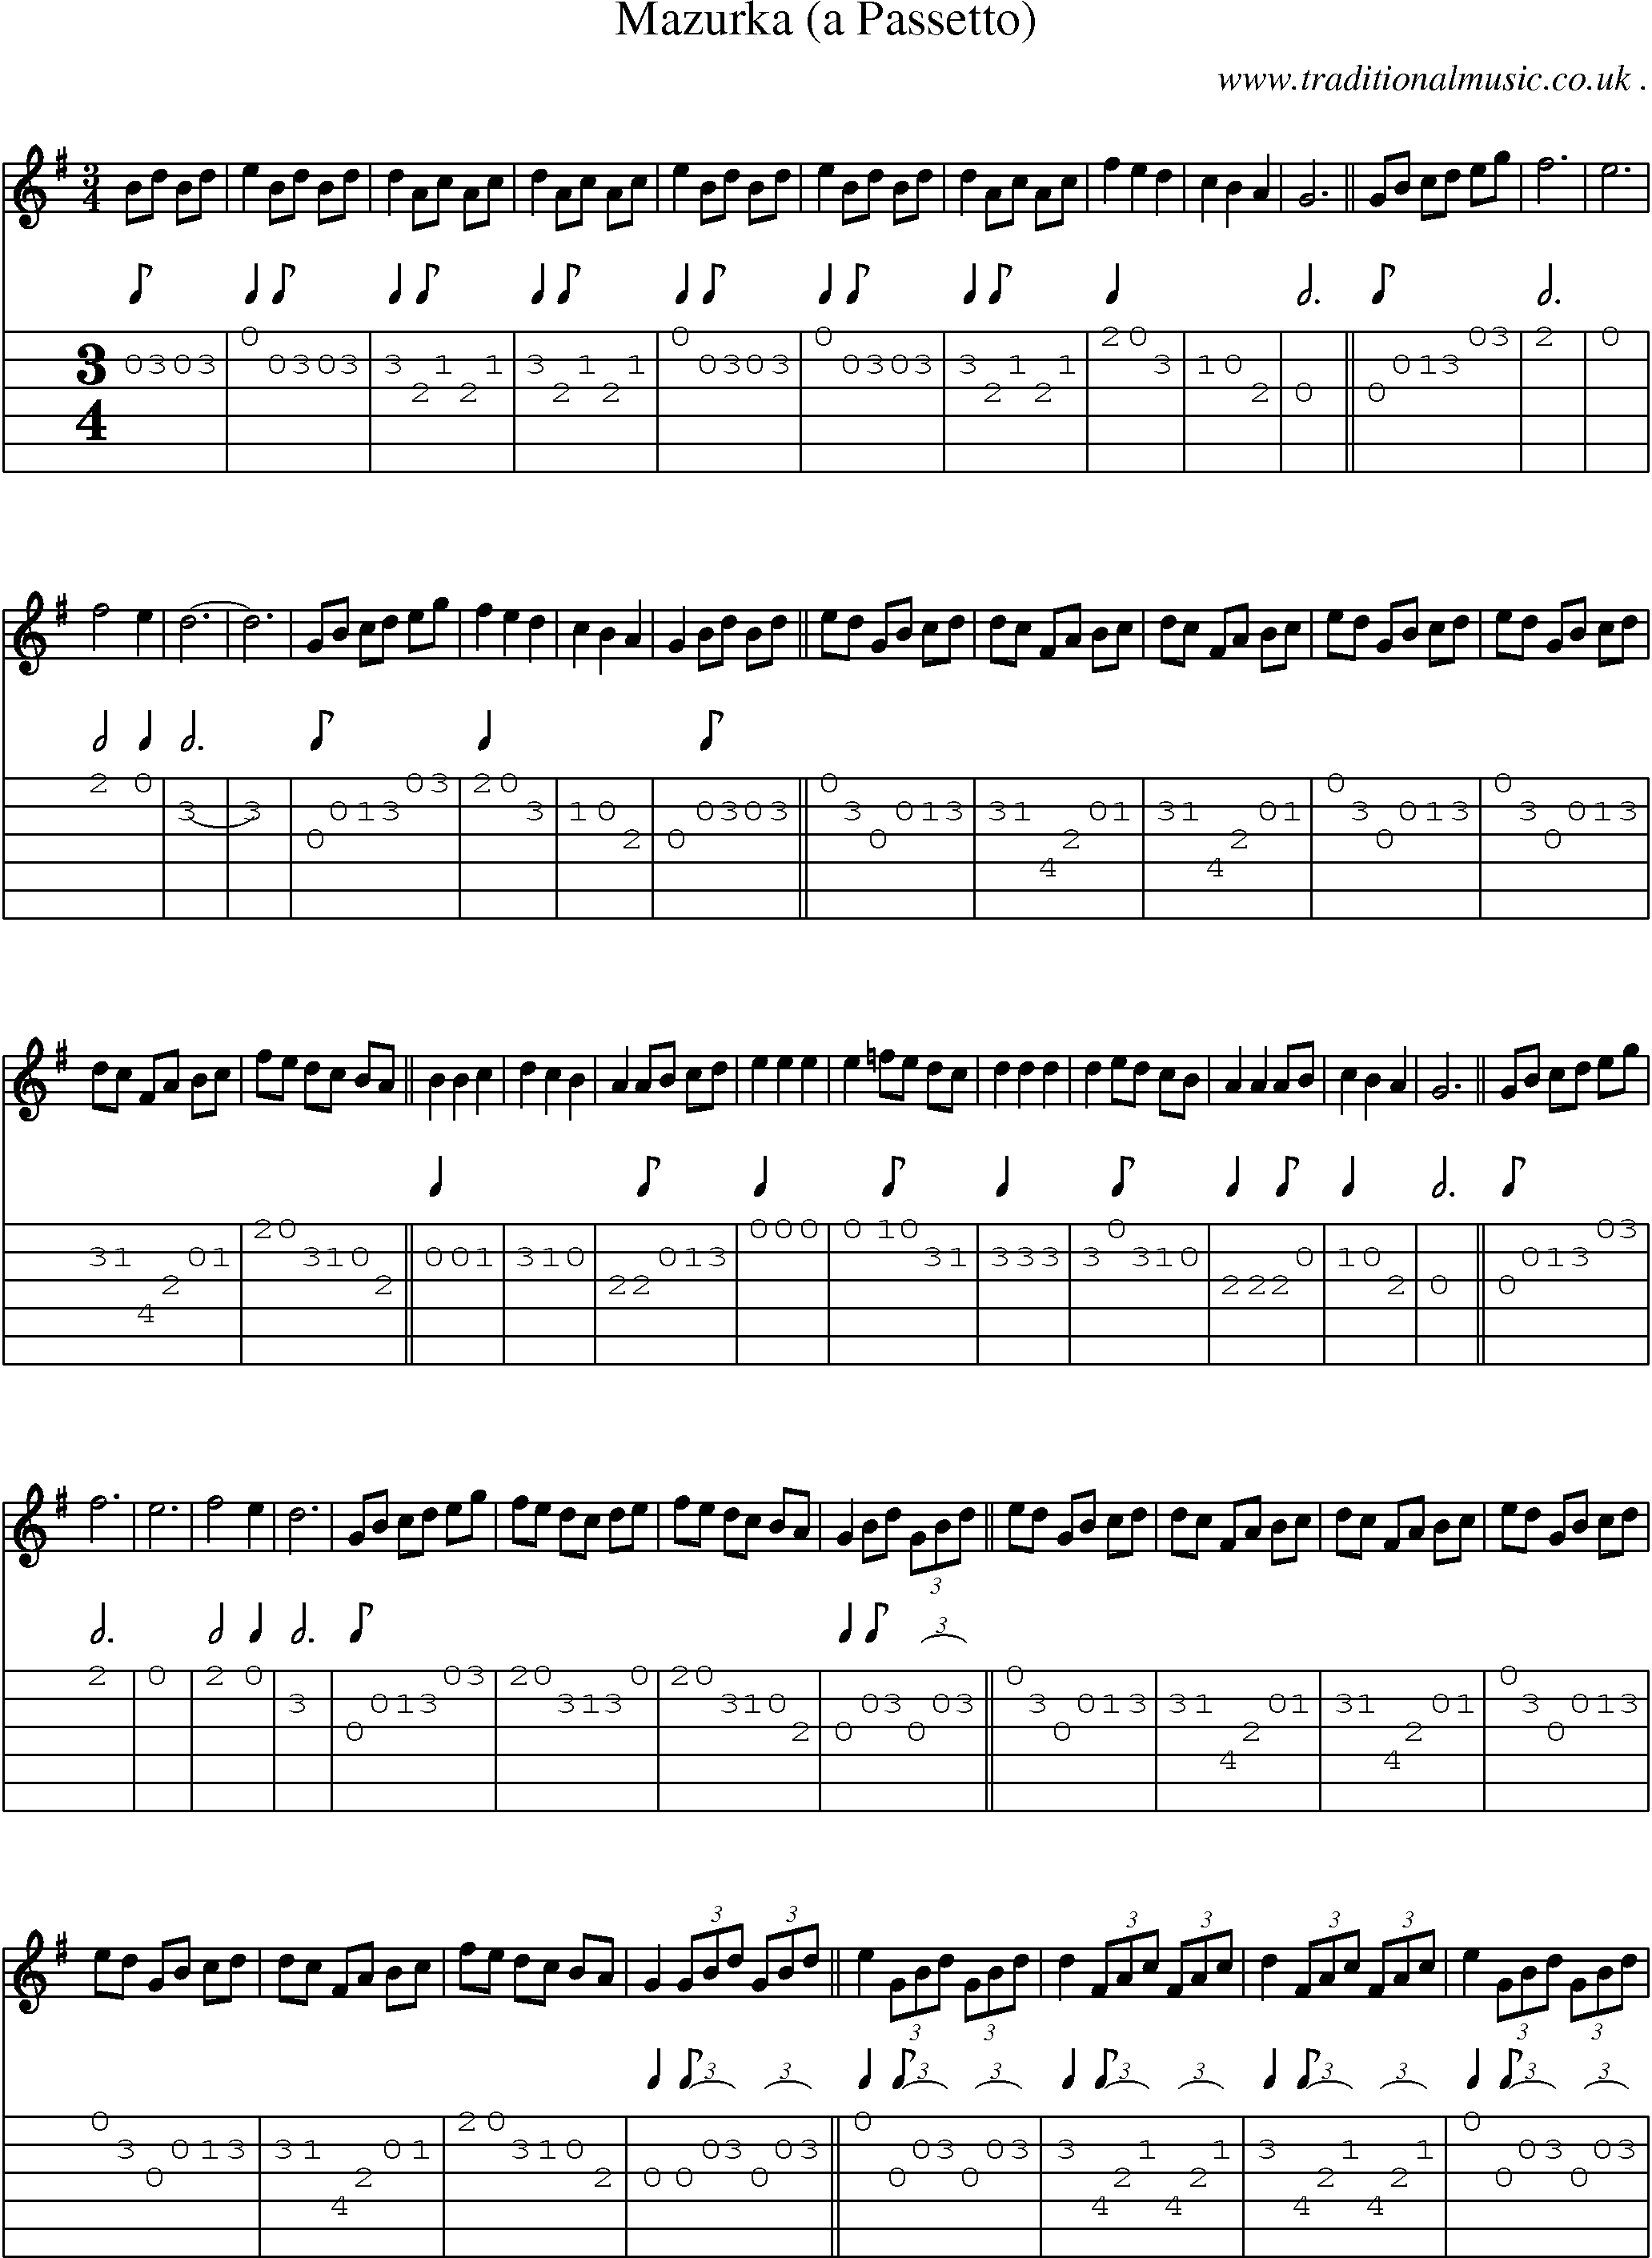 Sheet-Music and Guitar Tabs for Mazurka (a Passetto)